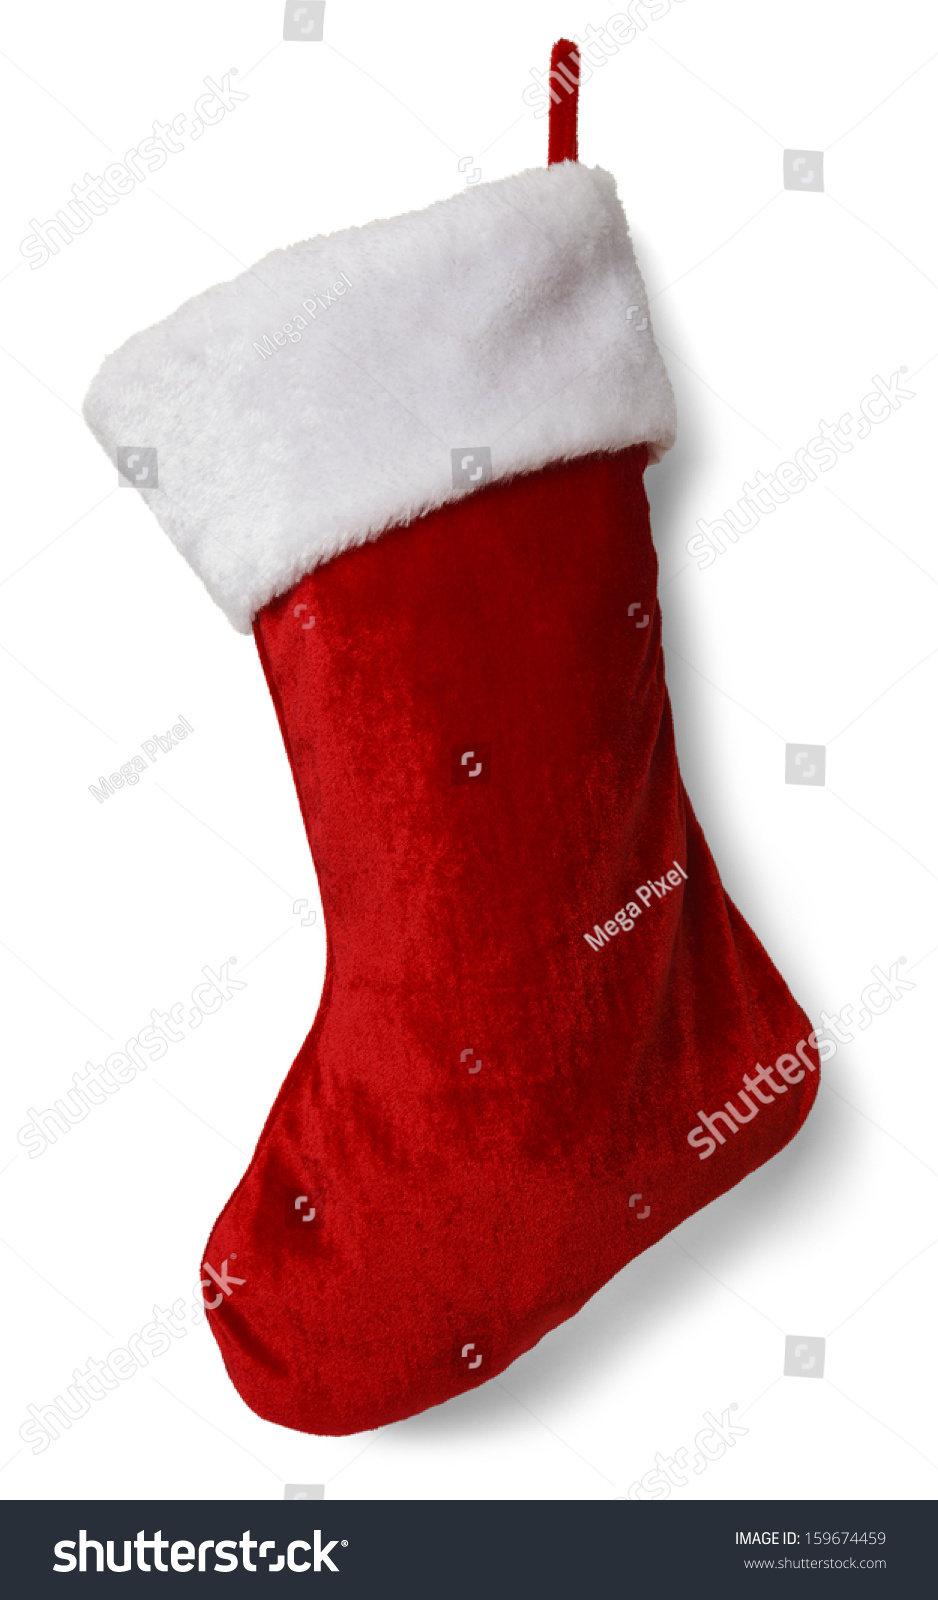 Red and White Empty  Stocking Isolated on White Background. #159674459